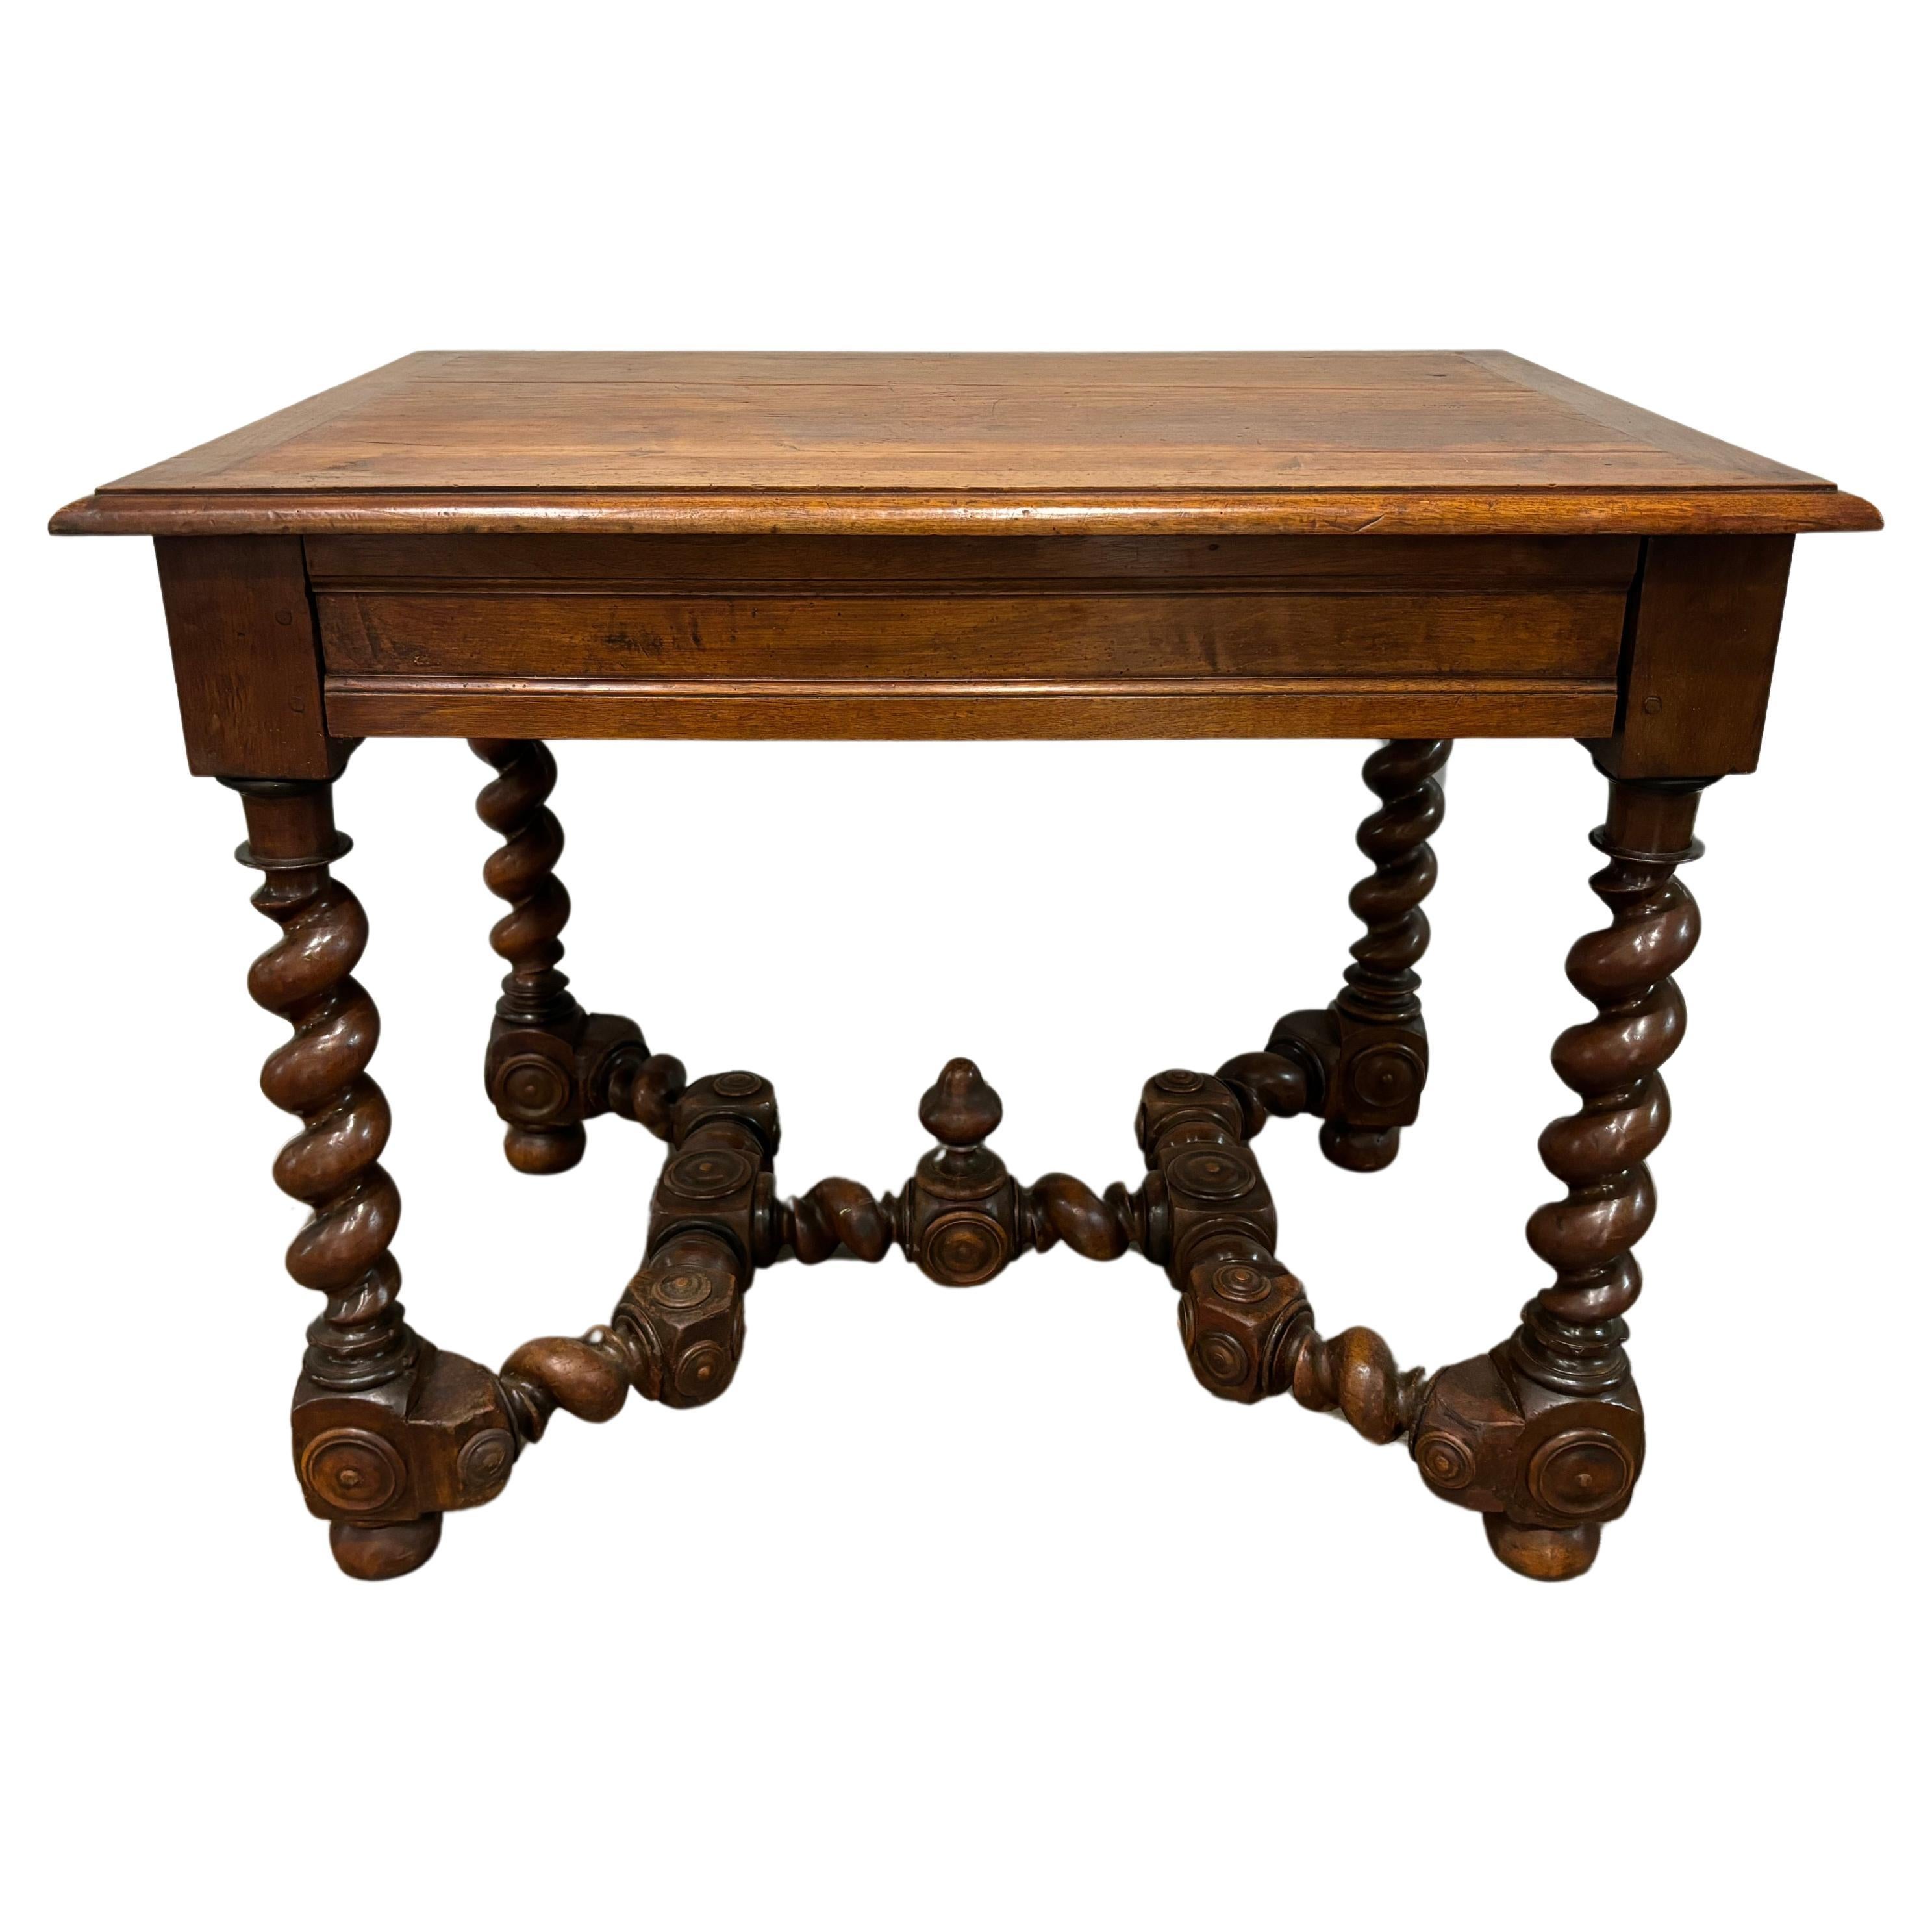 French 19th Century Writing Table